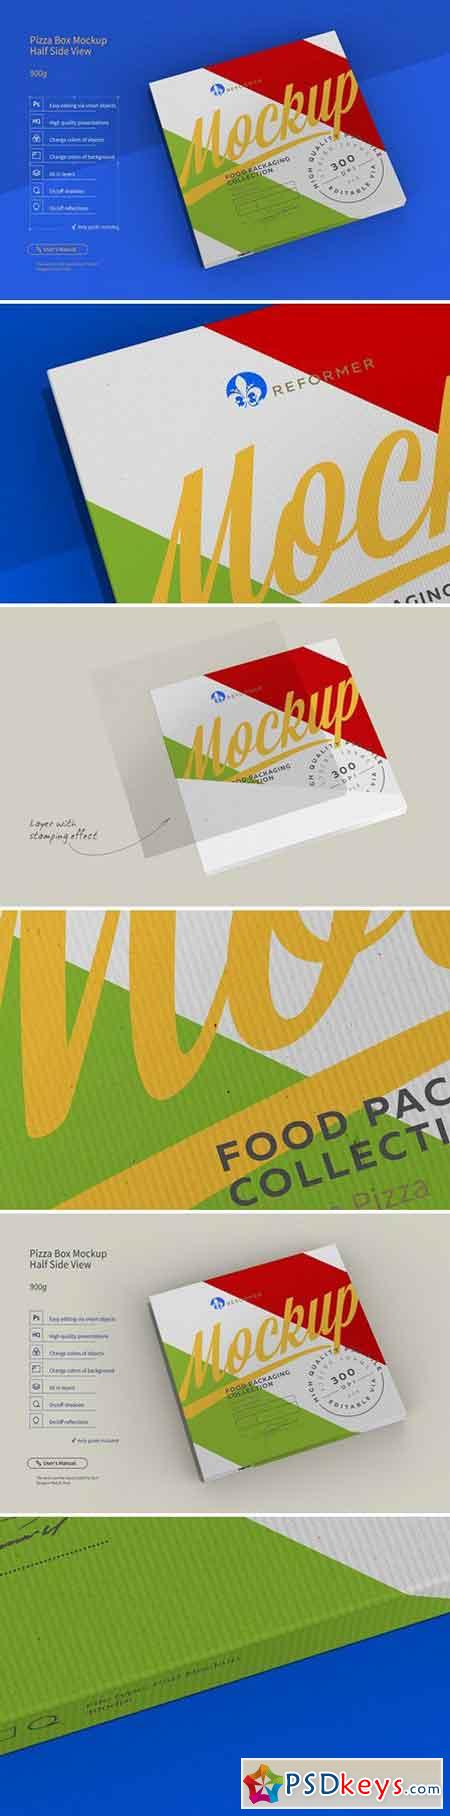 Download Box Page 8 Free Download Photoshop Vector Stock Image Via Torrent Zippyshare From Psdkeys Com